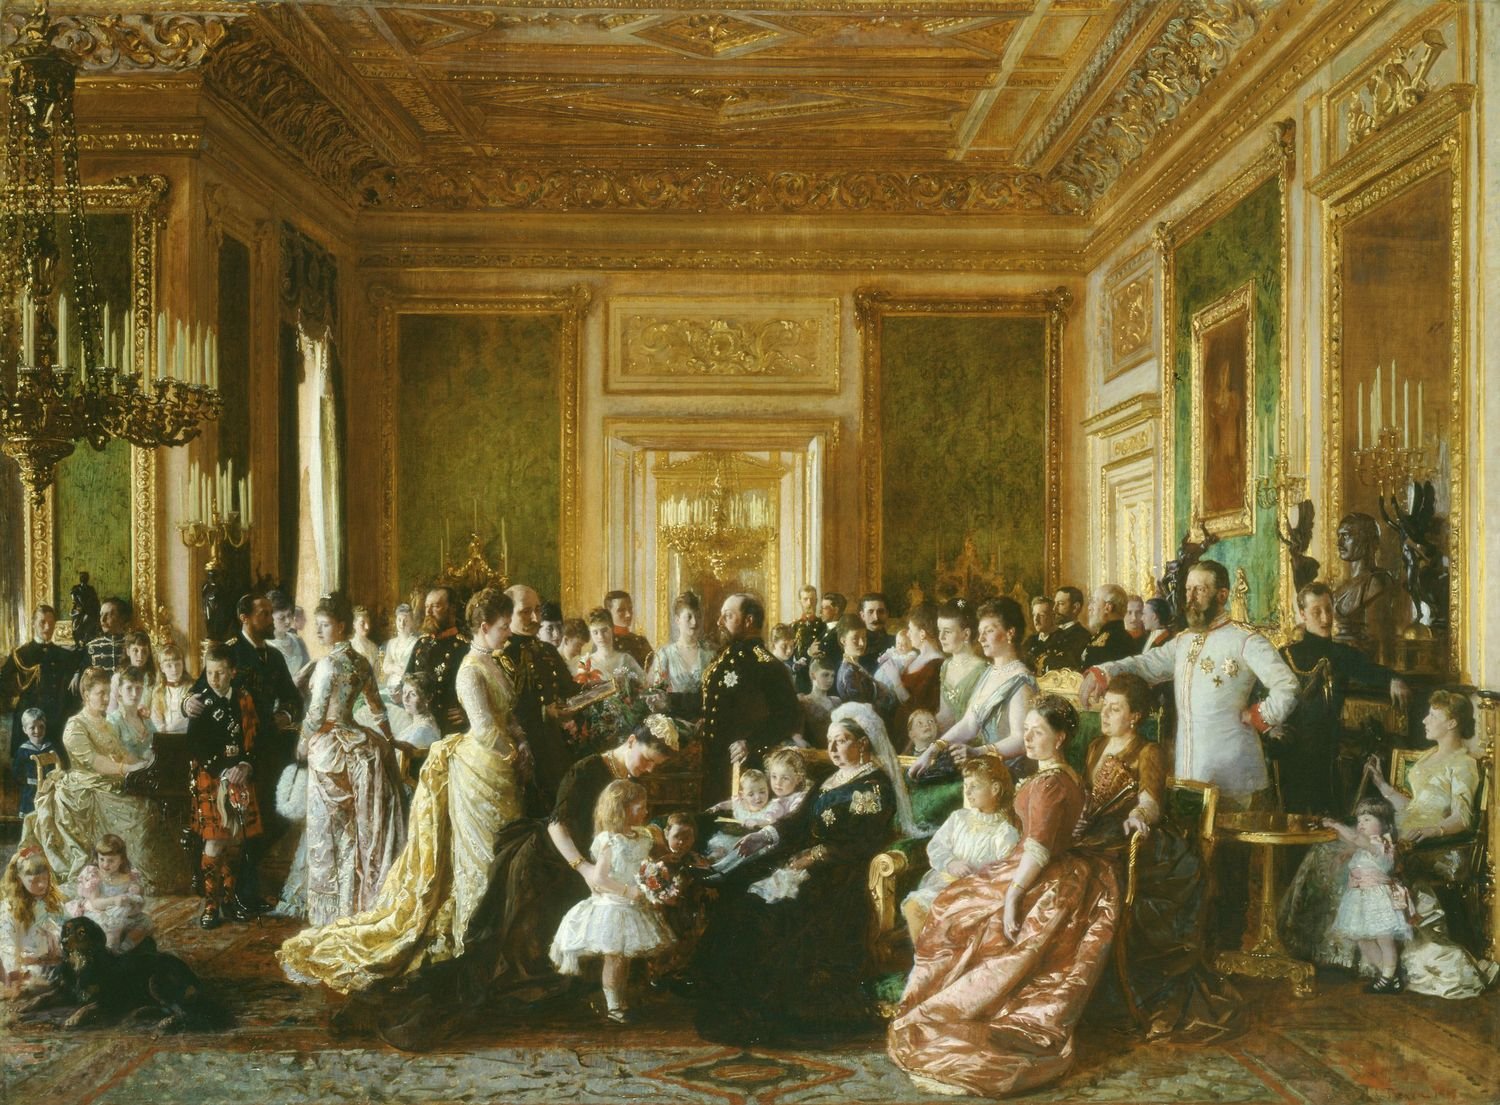 Queen Victoria is sitting in the Green Drawing Room at Windsor Castle, surrounded by members of her family. On the mantelpiece is a bronze bust of Prince Albert. Queen Victoria commissioned the painting to commemorate the gathering of her family for the G